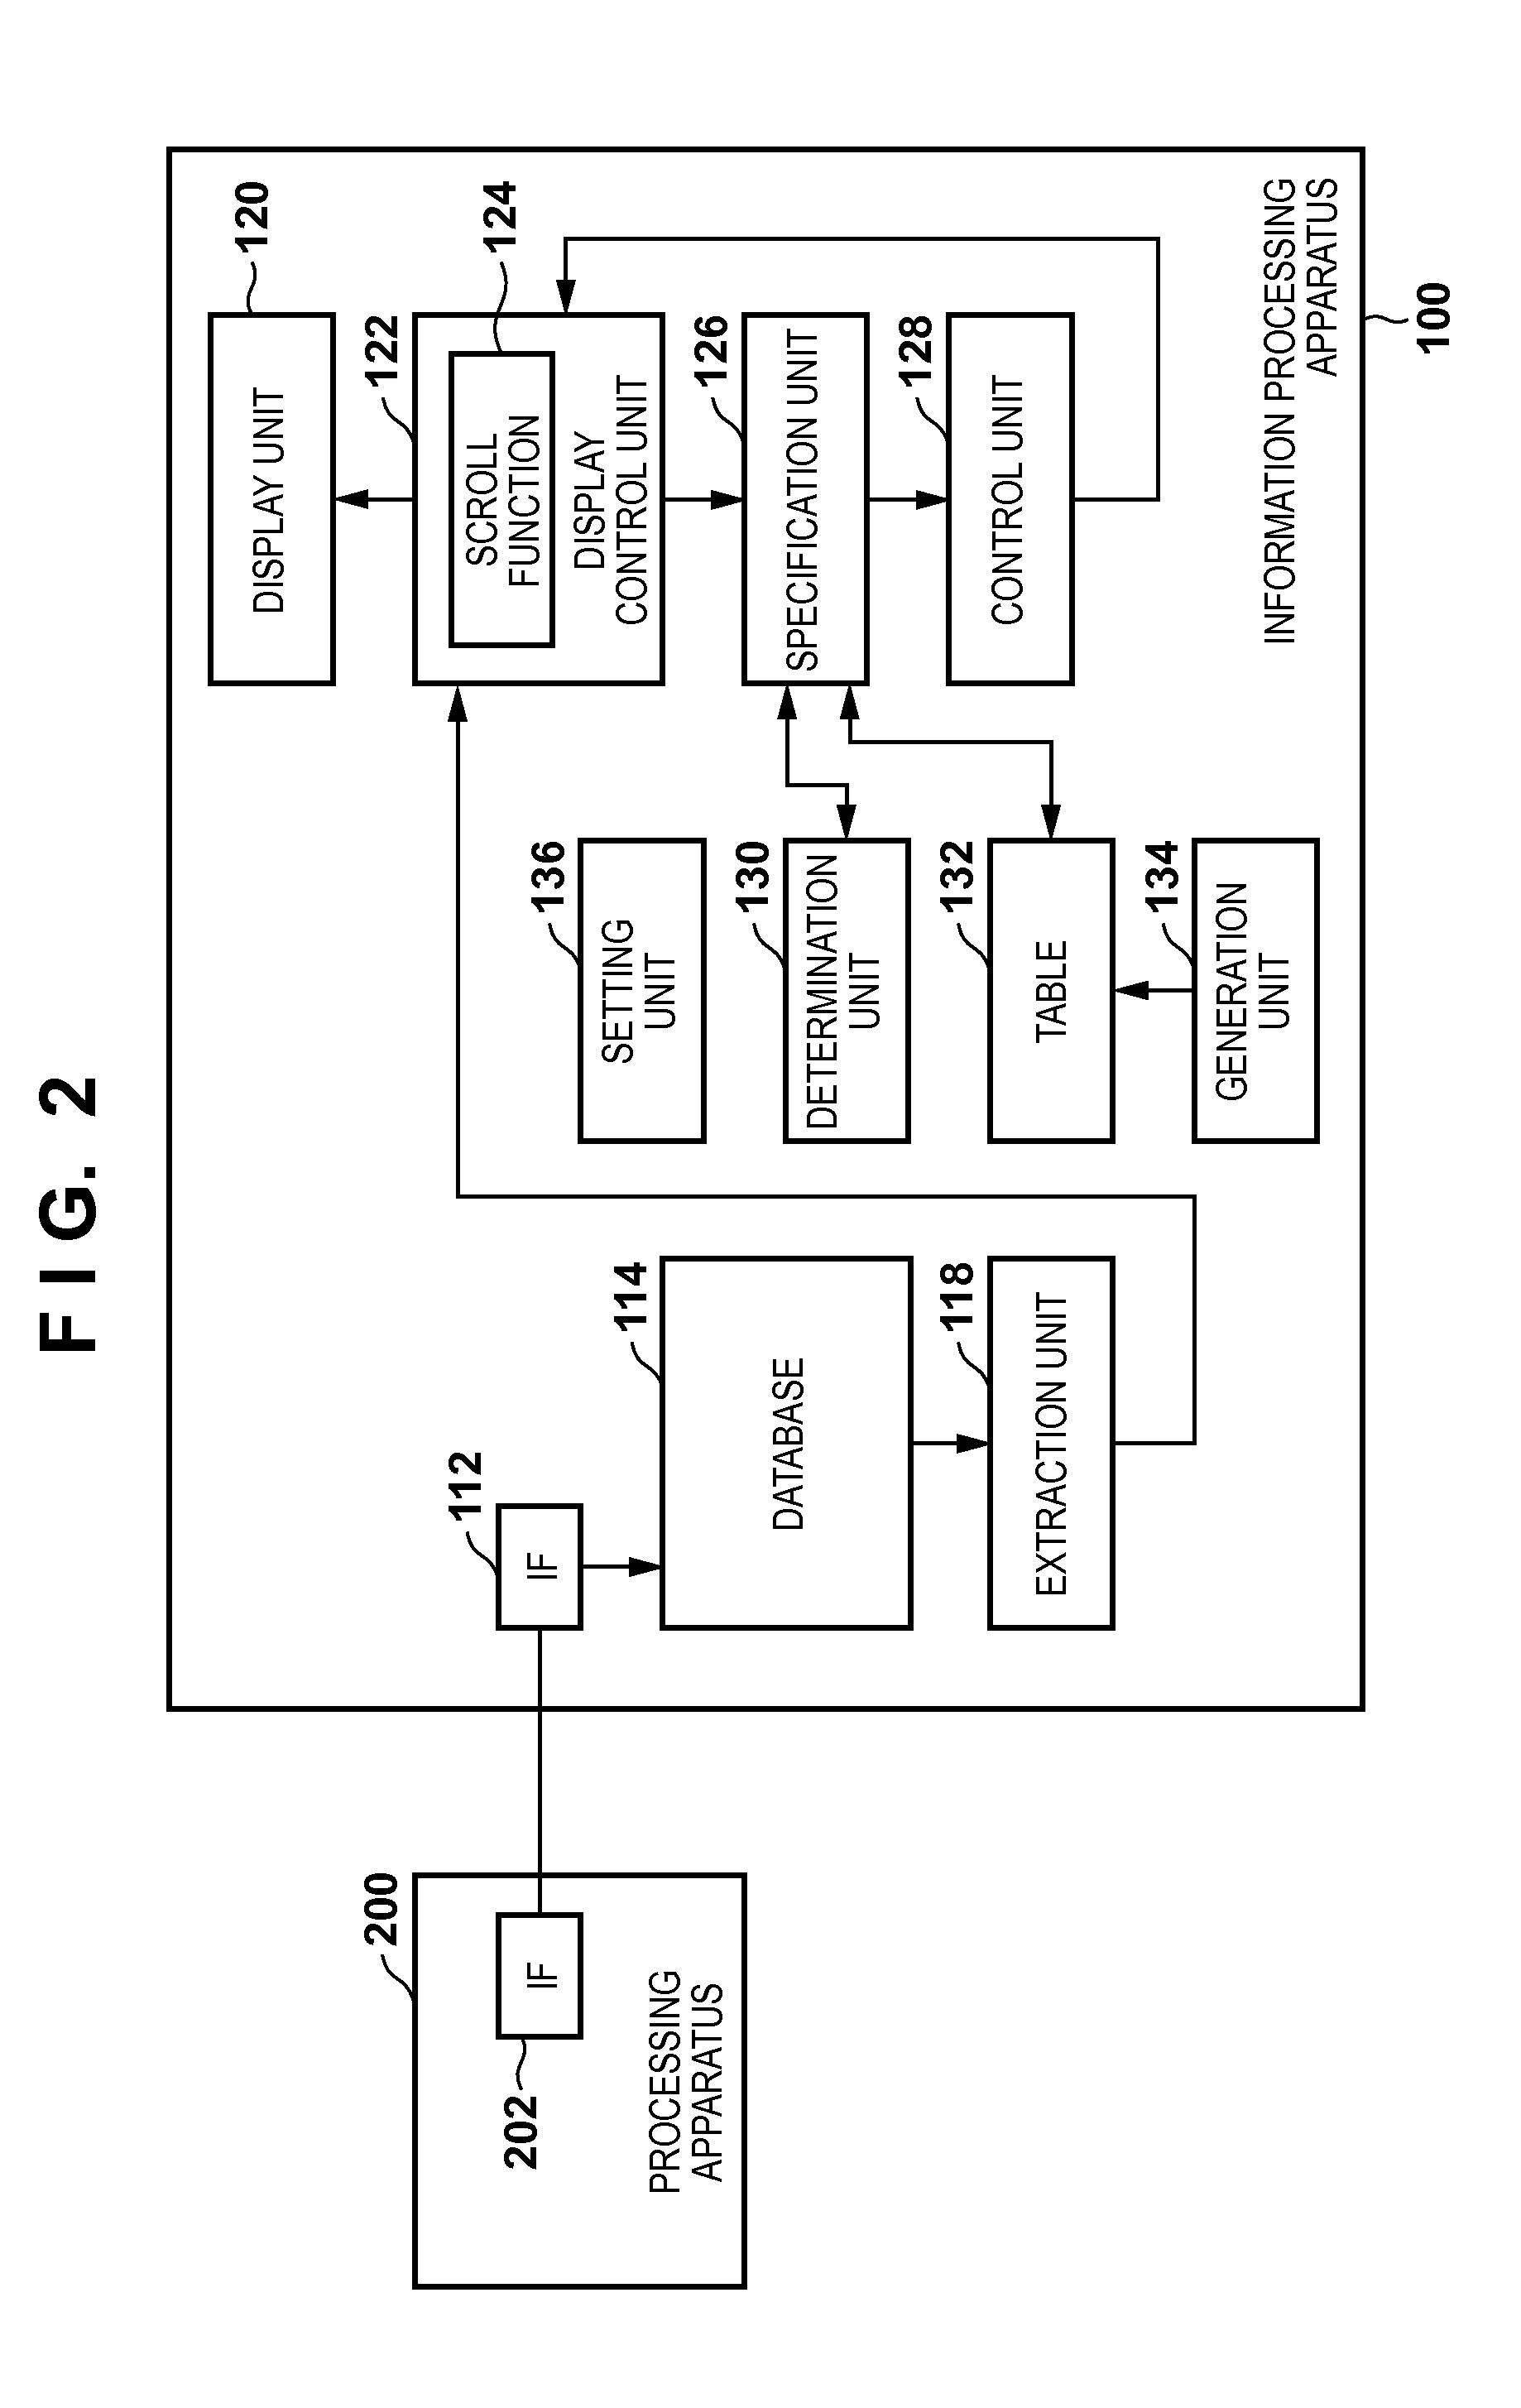 Information processing apparatus for processing plural event data generated by processing apparatus